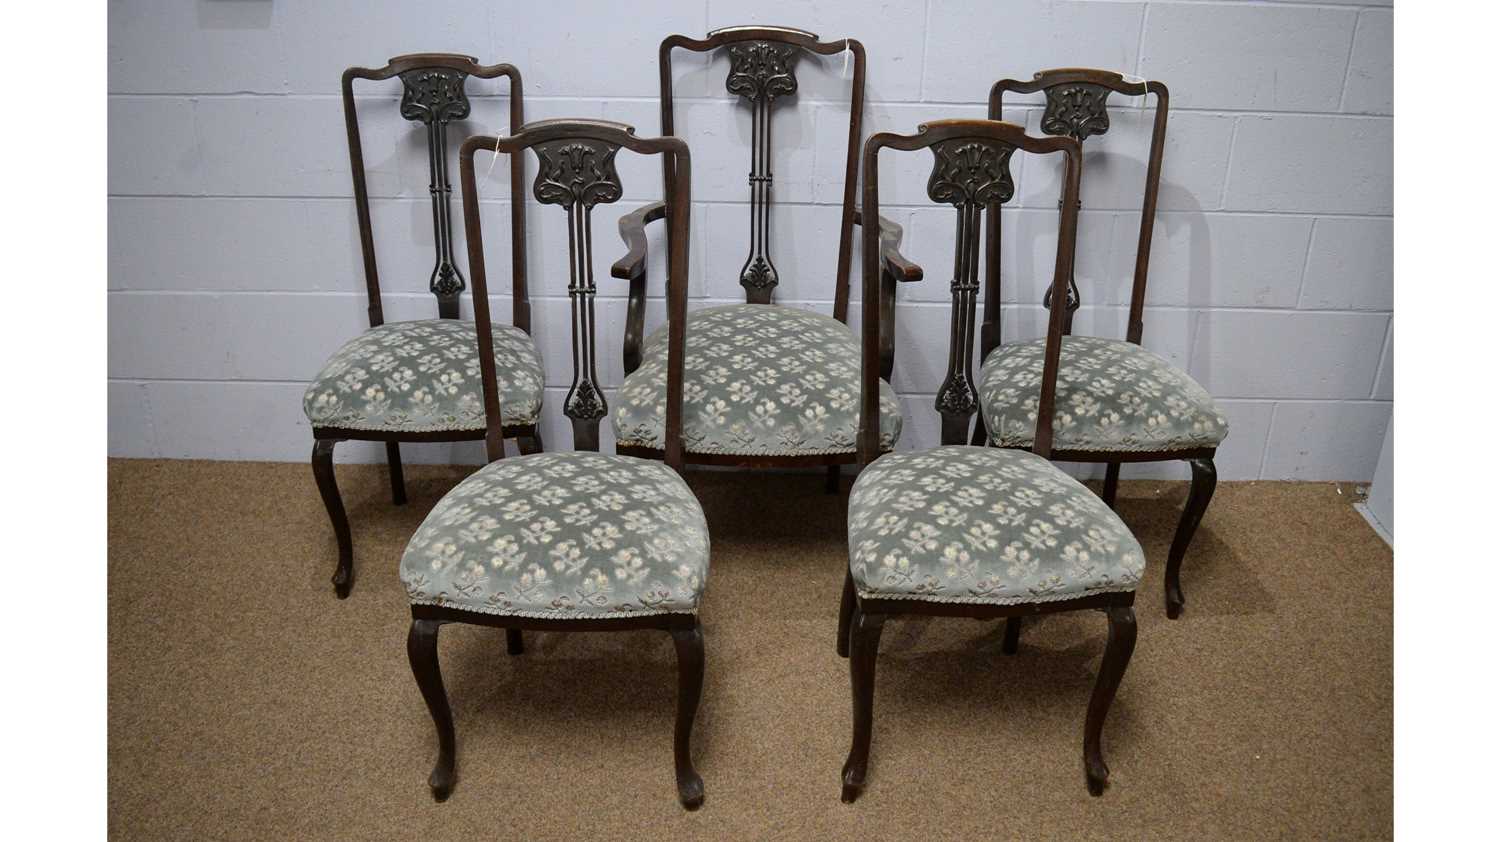 Five early 20th Century Art Nouveau salon/dining chairs.